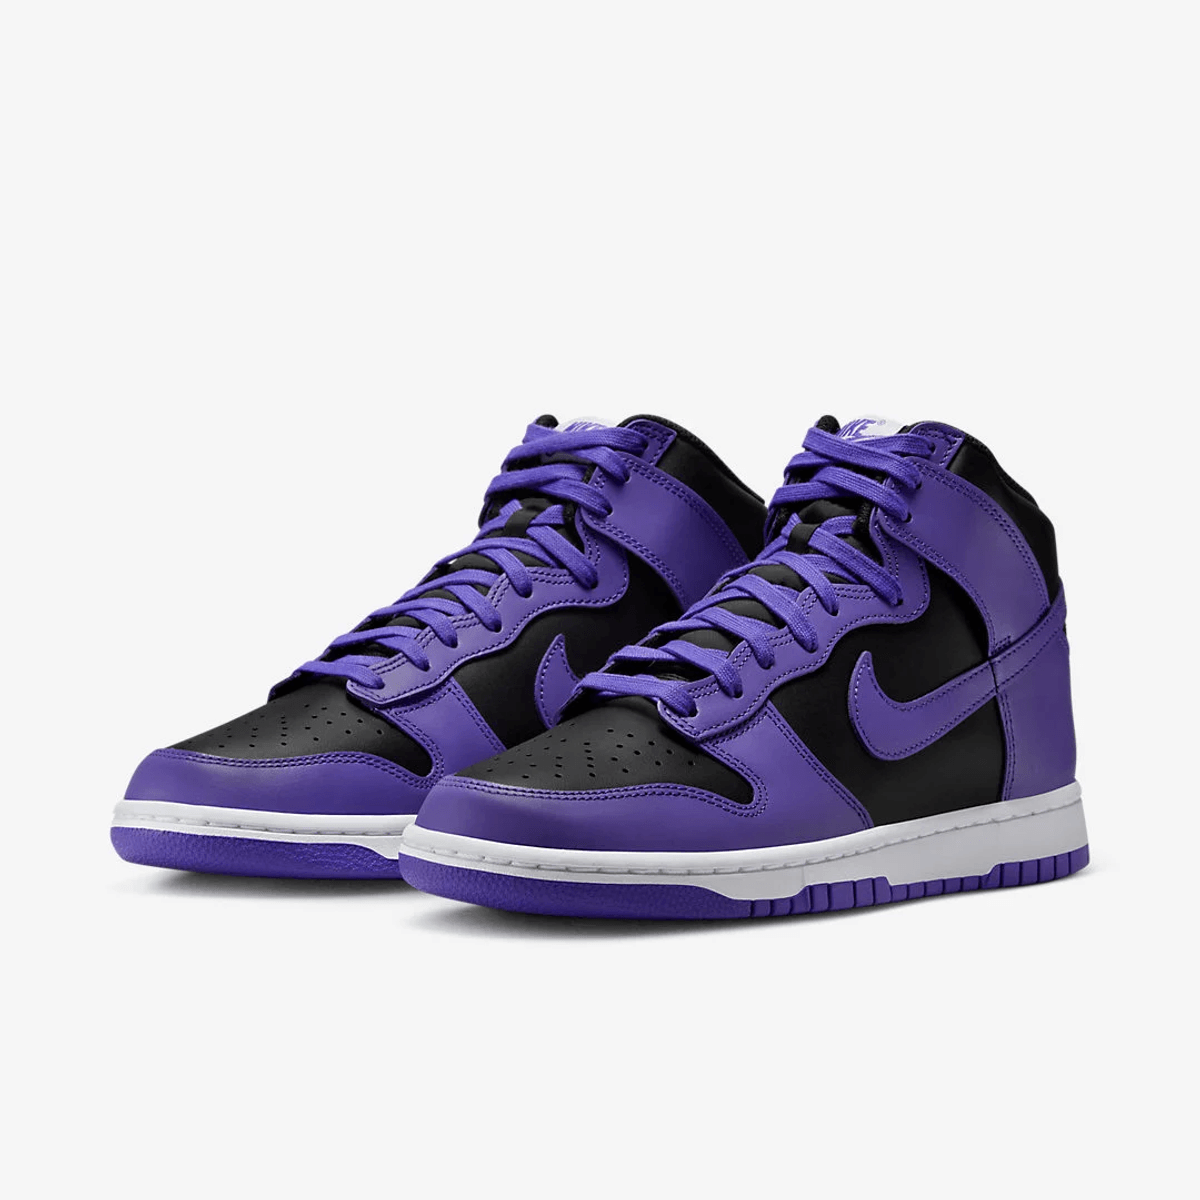 The Nike Dunk High Psychic Purple Arrives 2023